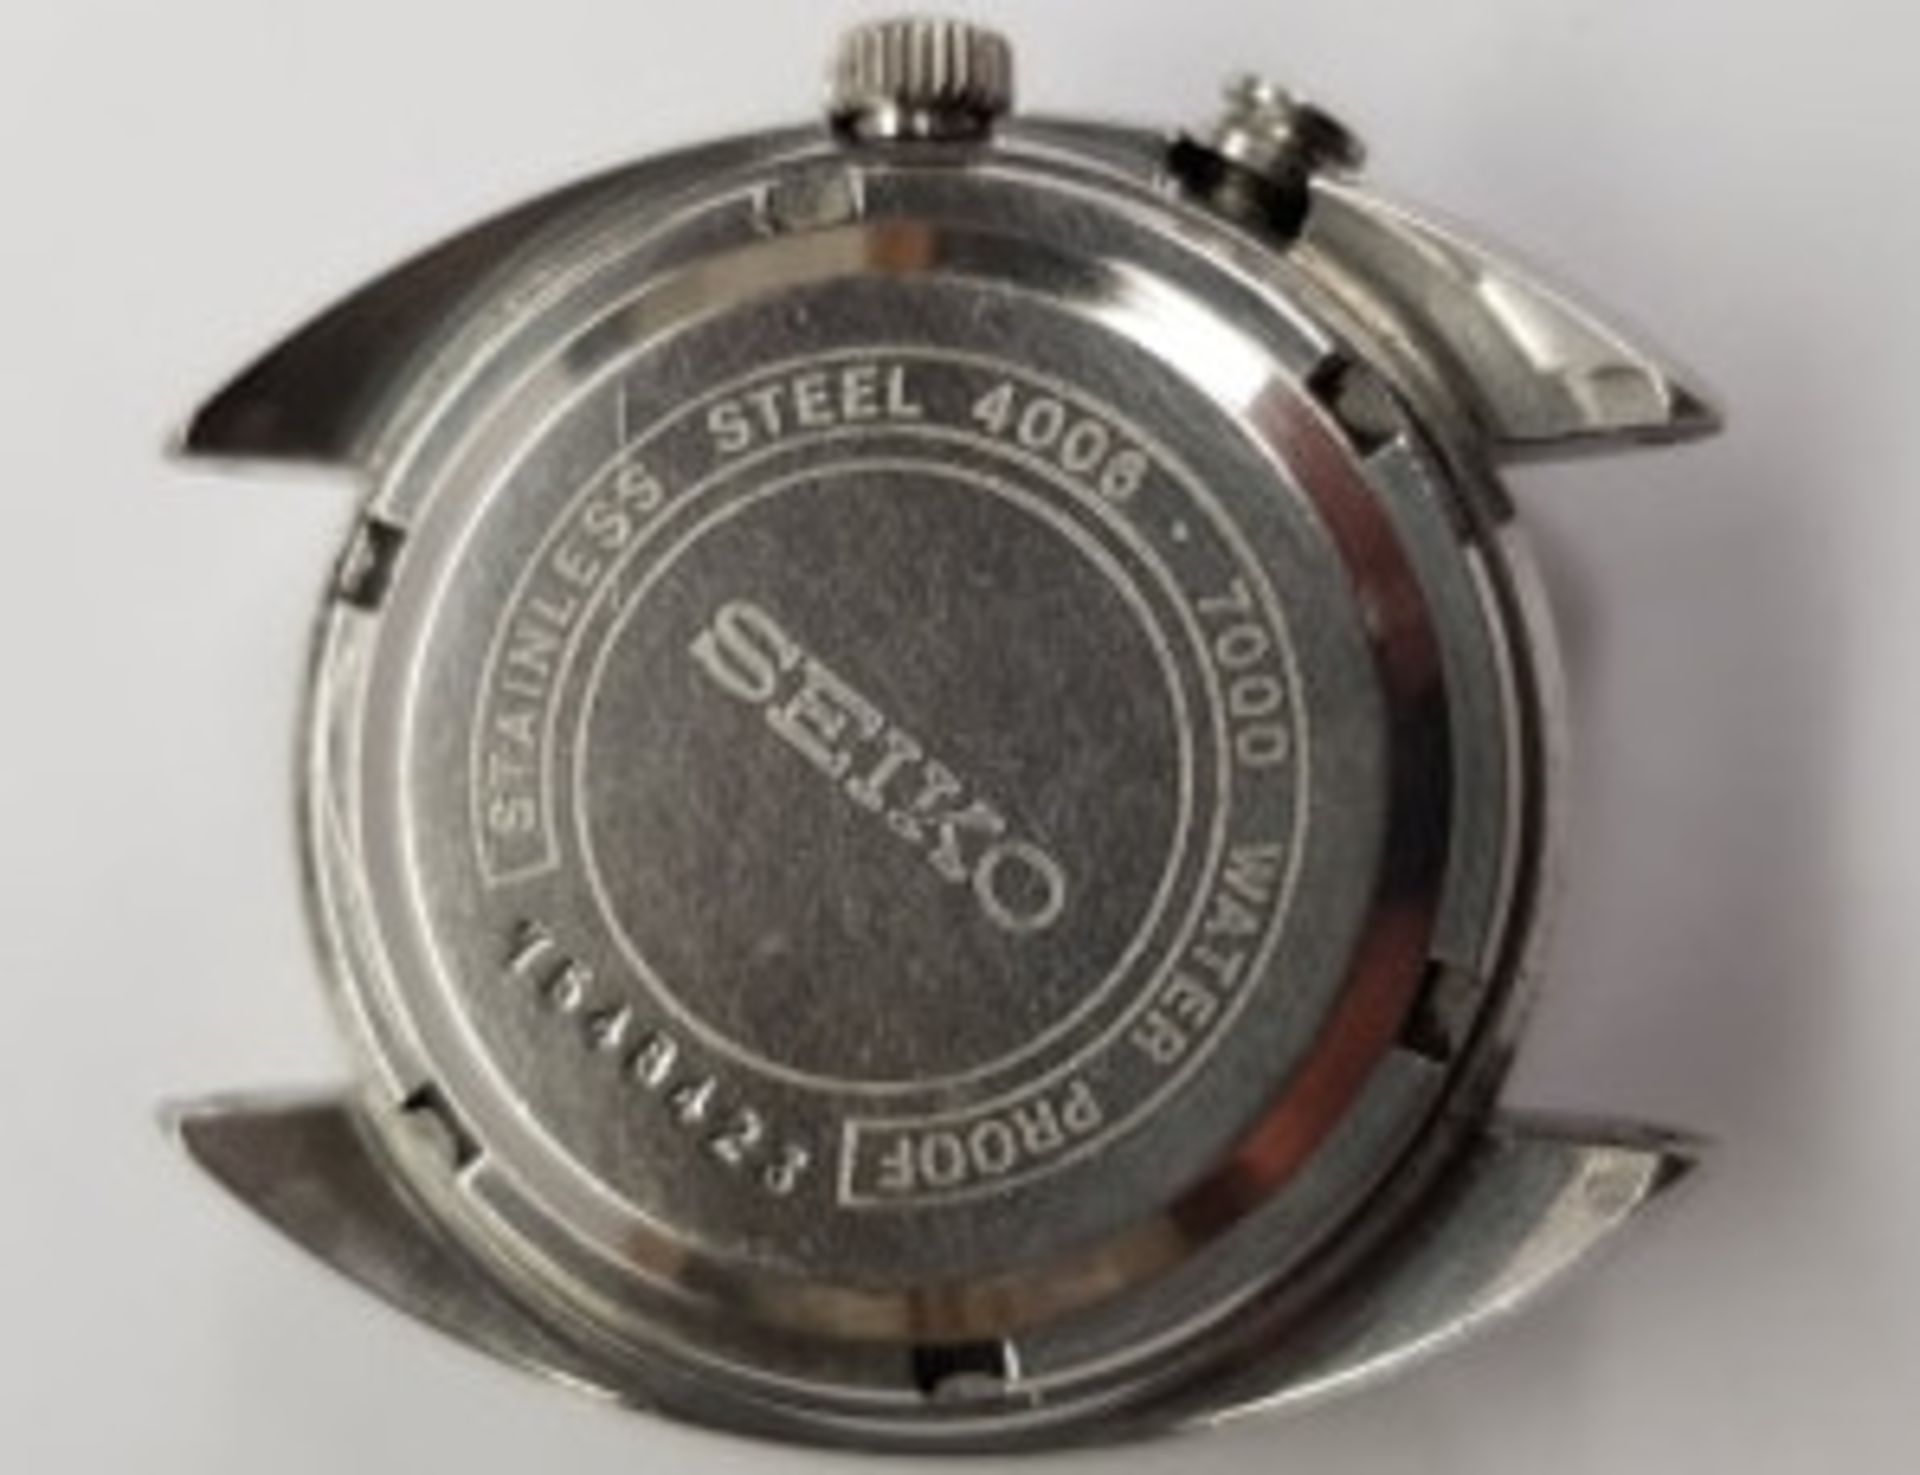 Seiko Bell-Matic 4006-7000 - Image 4 of 4